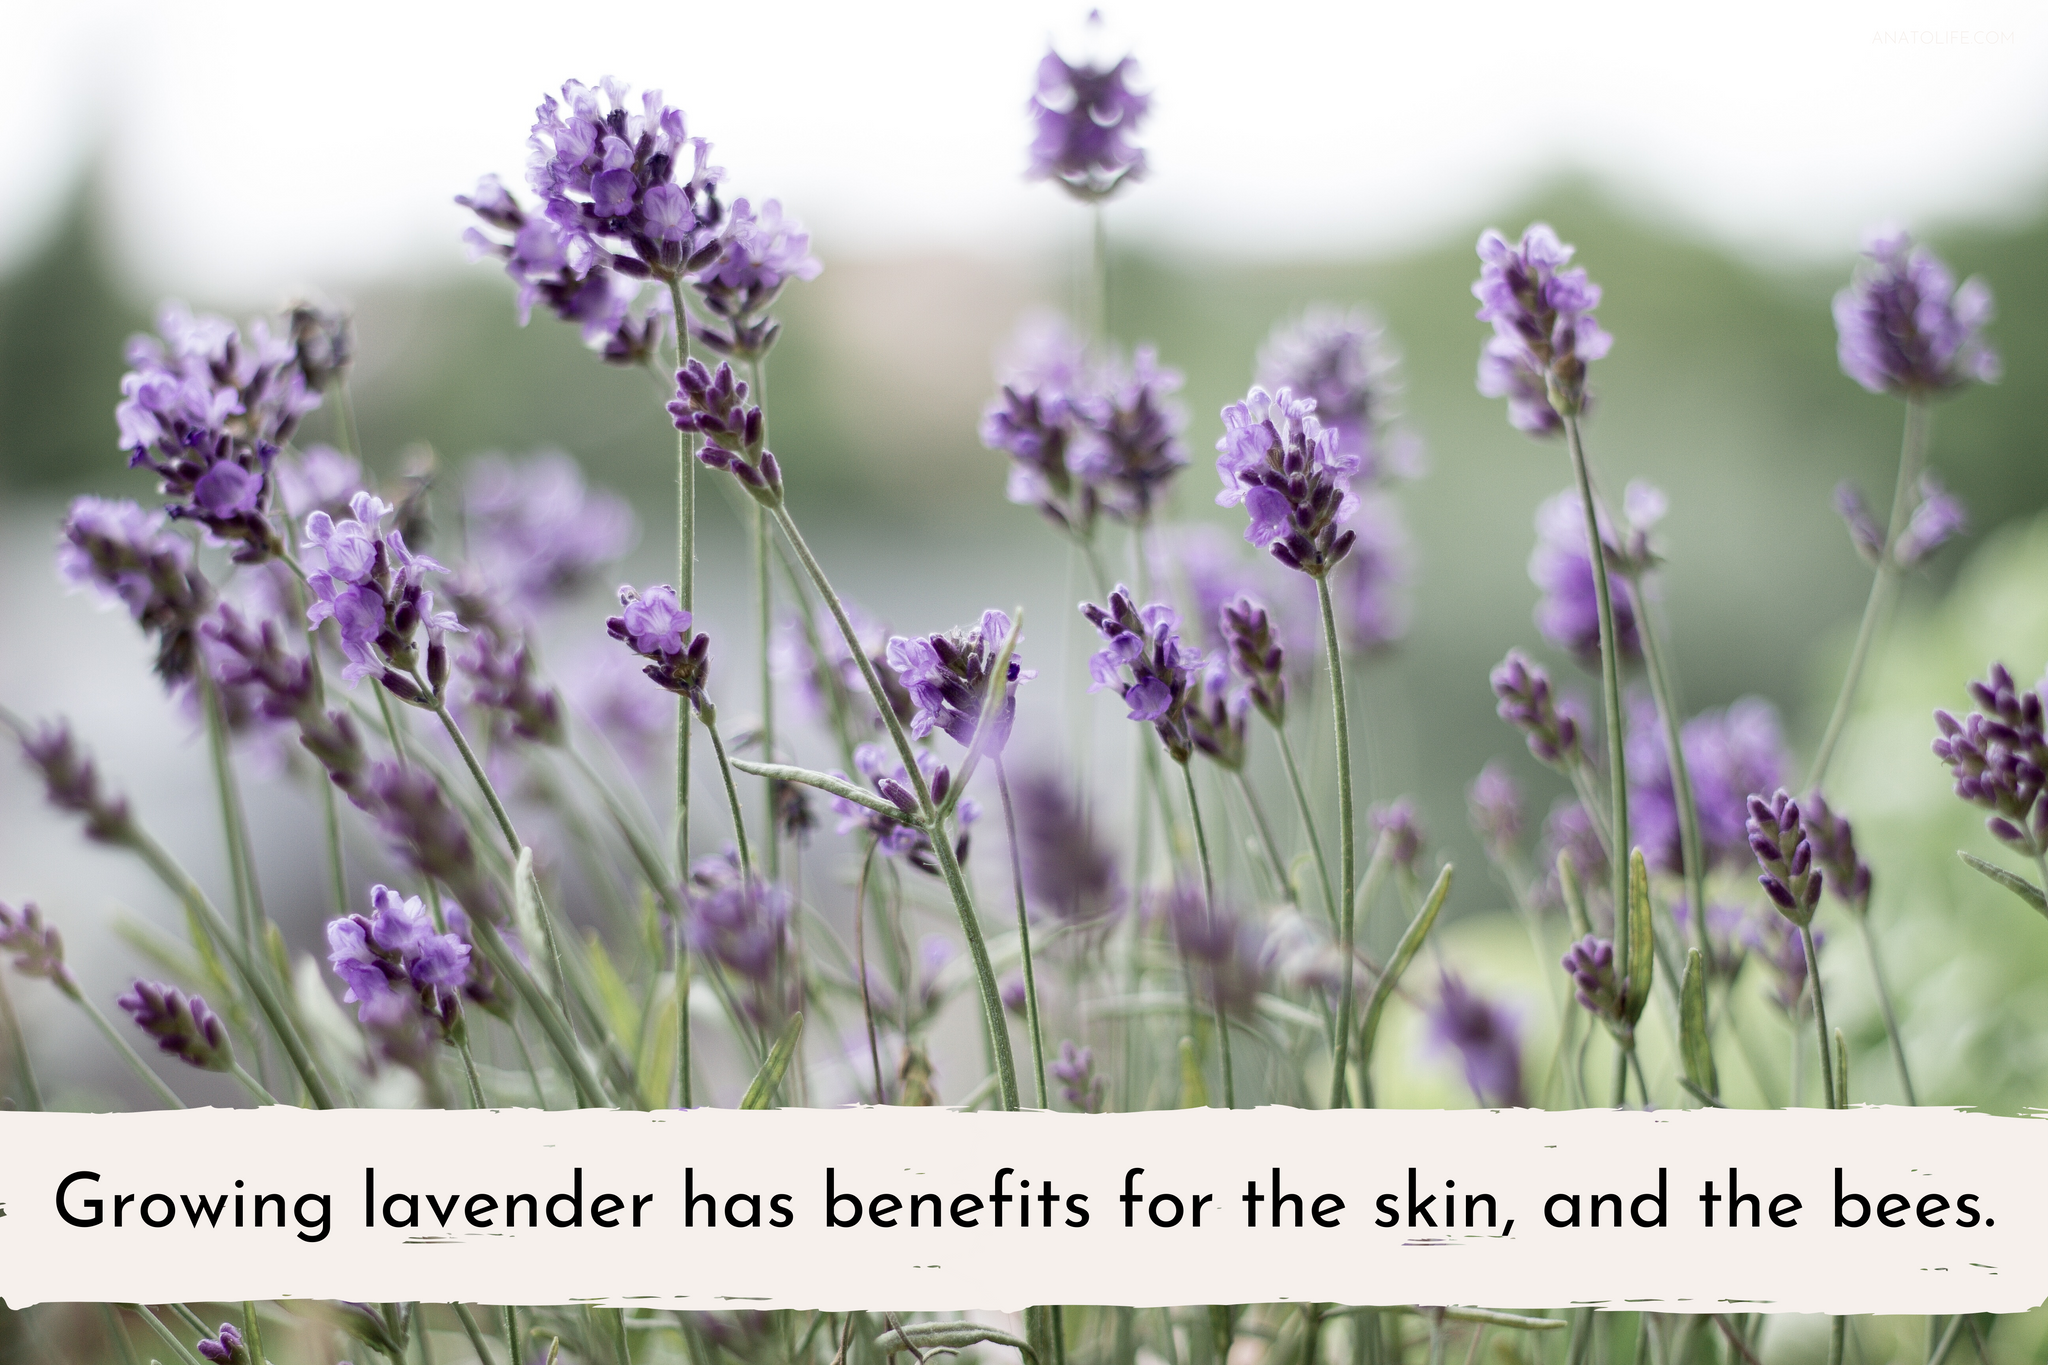 Growing lavender has benefits for the skin, and the bees